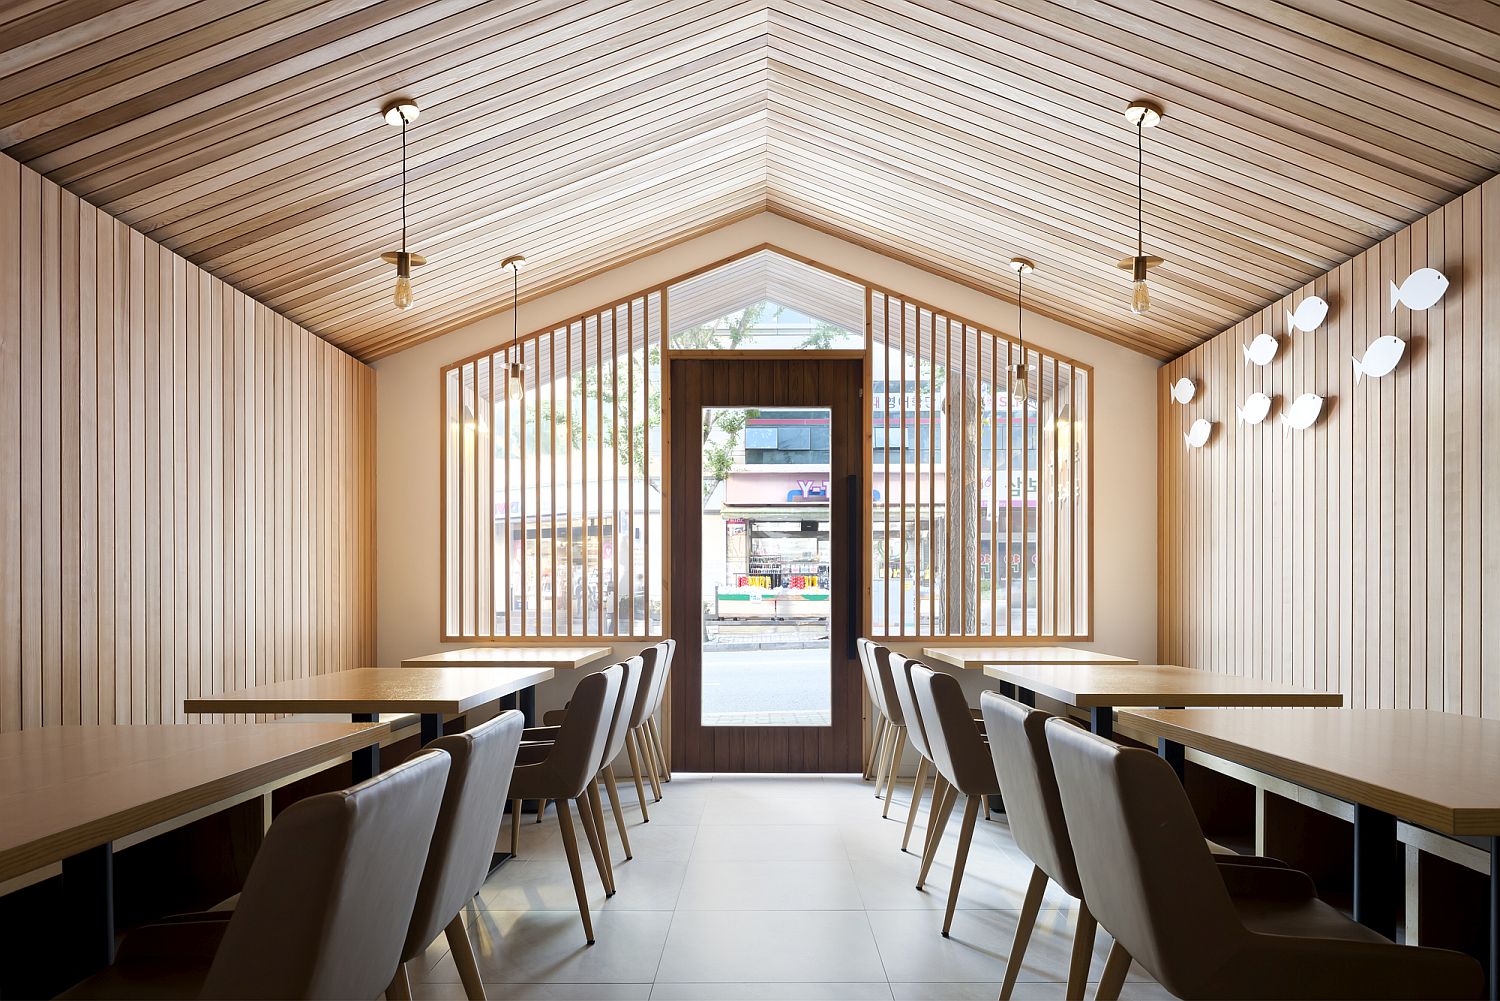 Gable roof and red cedar create a light-filled ambiance inside the small restaurant